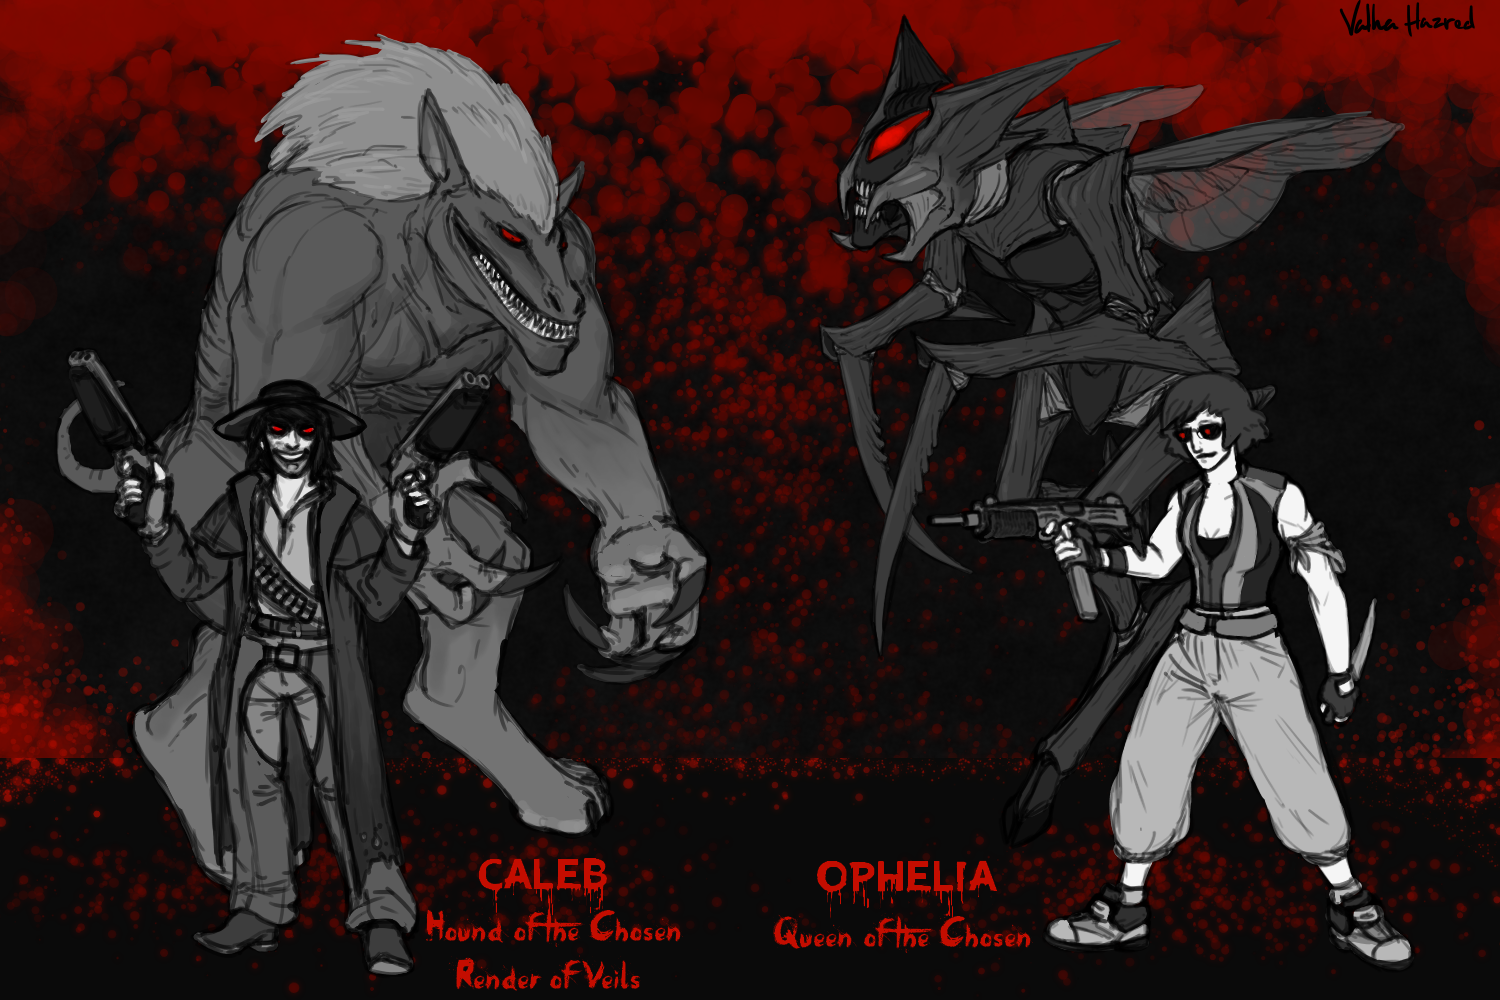 Blood 2 The Chosen Redesign Caleb And Ophelia By Valhahazred On Deviantart